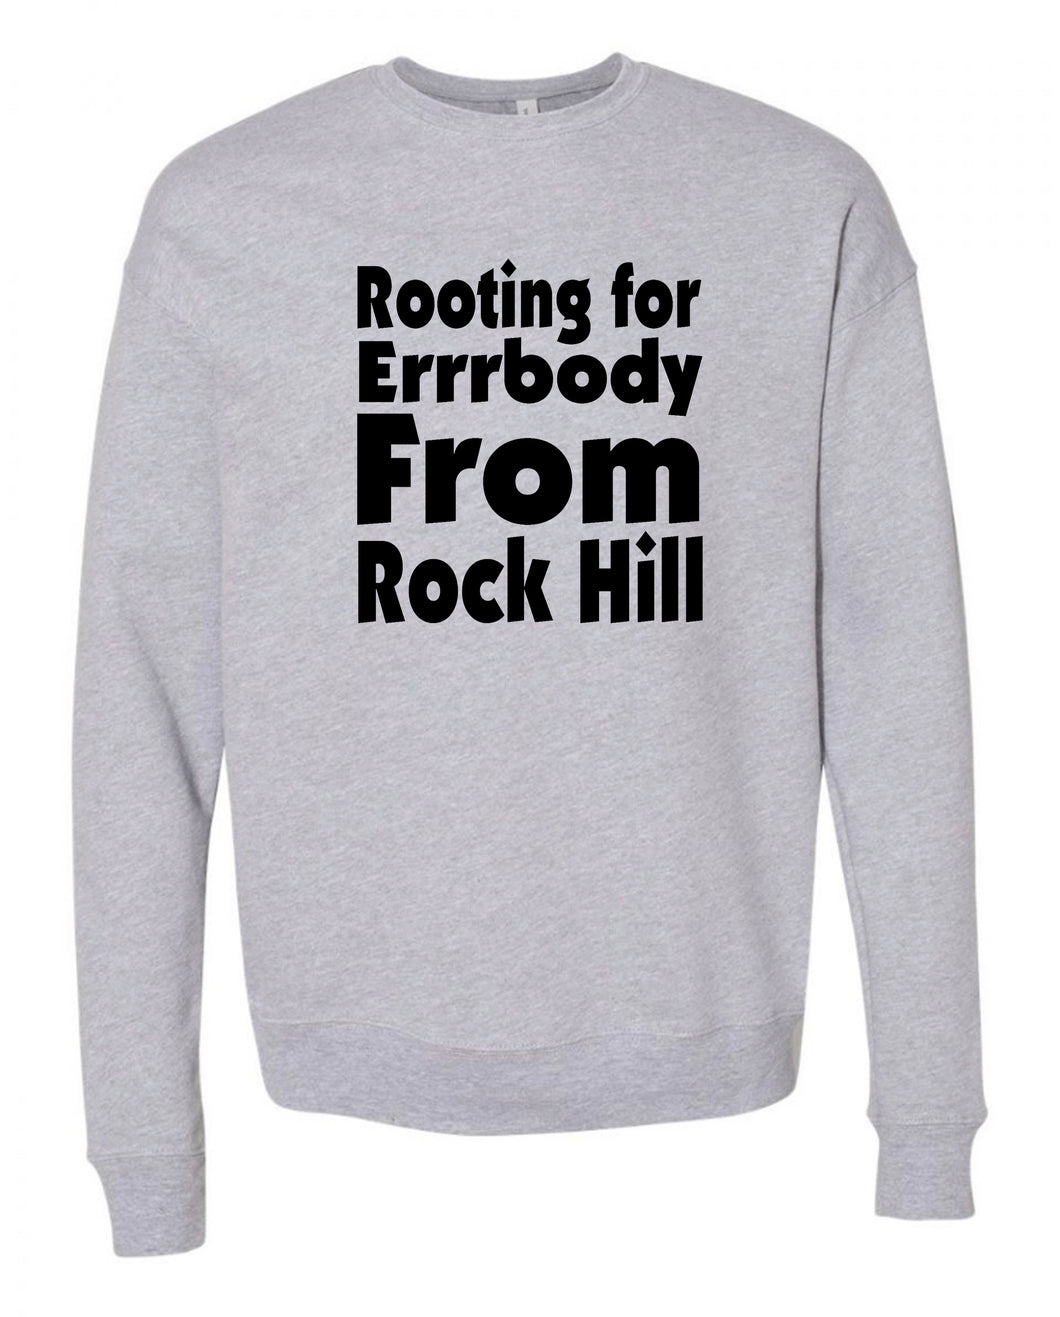 Rooting For Rock Hill Crewneck